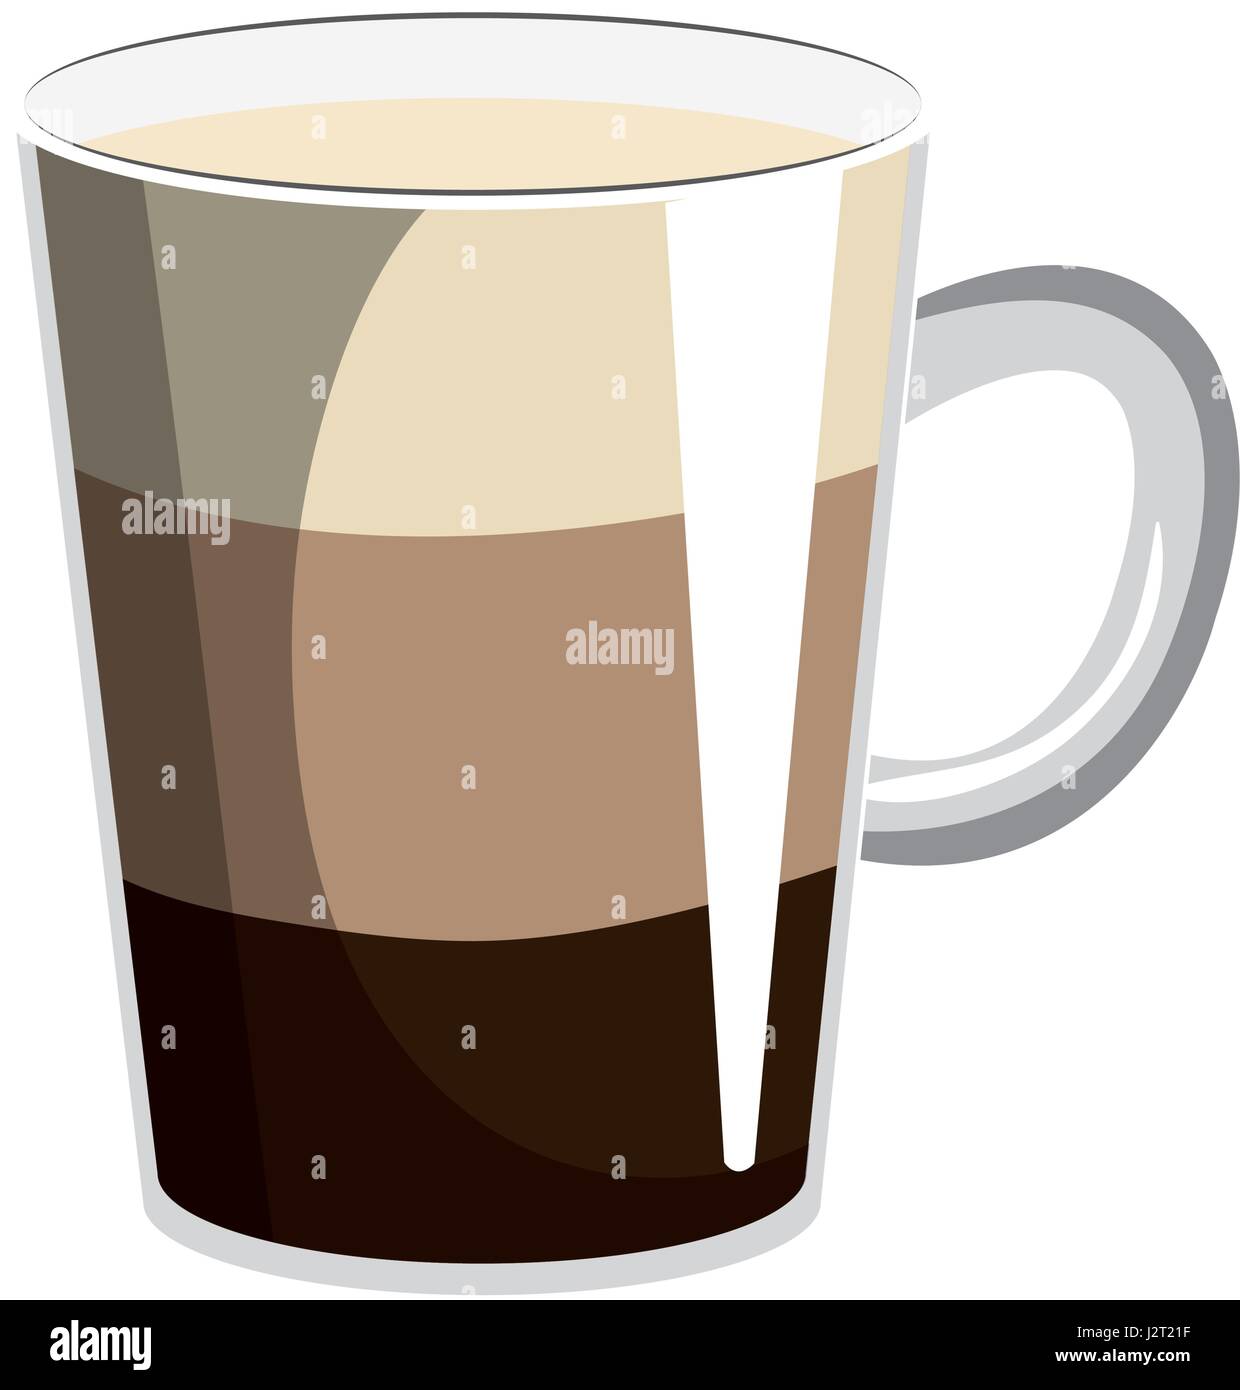 https://c8.alamy.com/comp/J2T21F/coffee-cup-isolated-icon-J2T21F.jpg